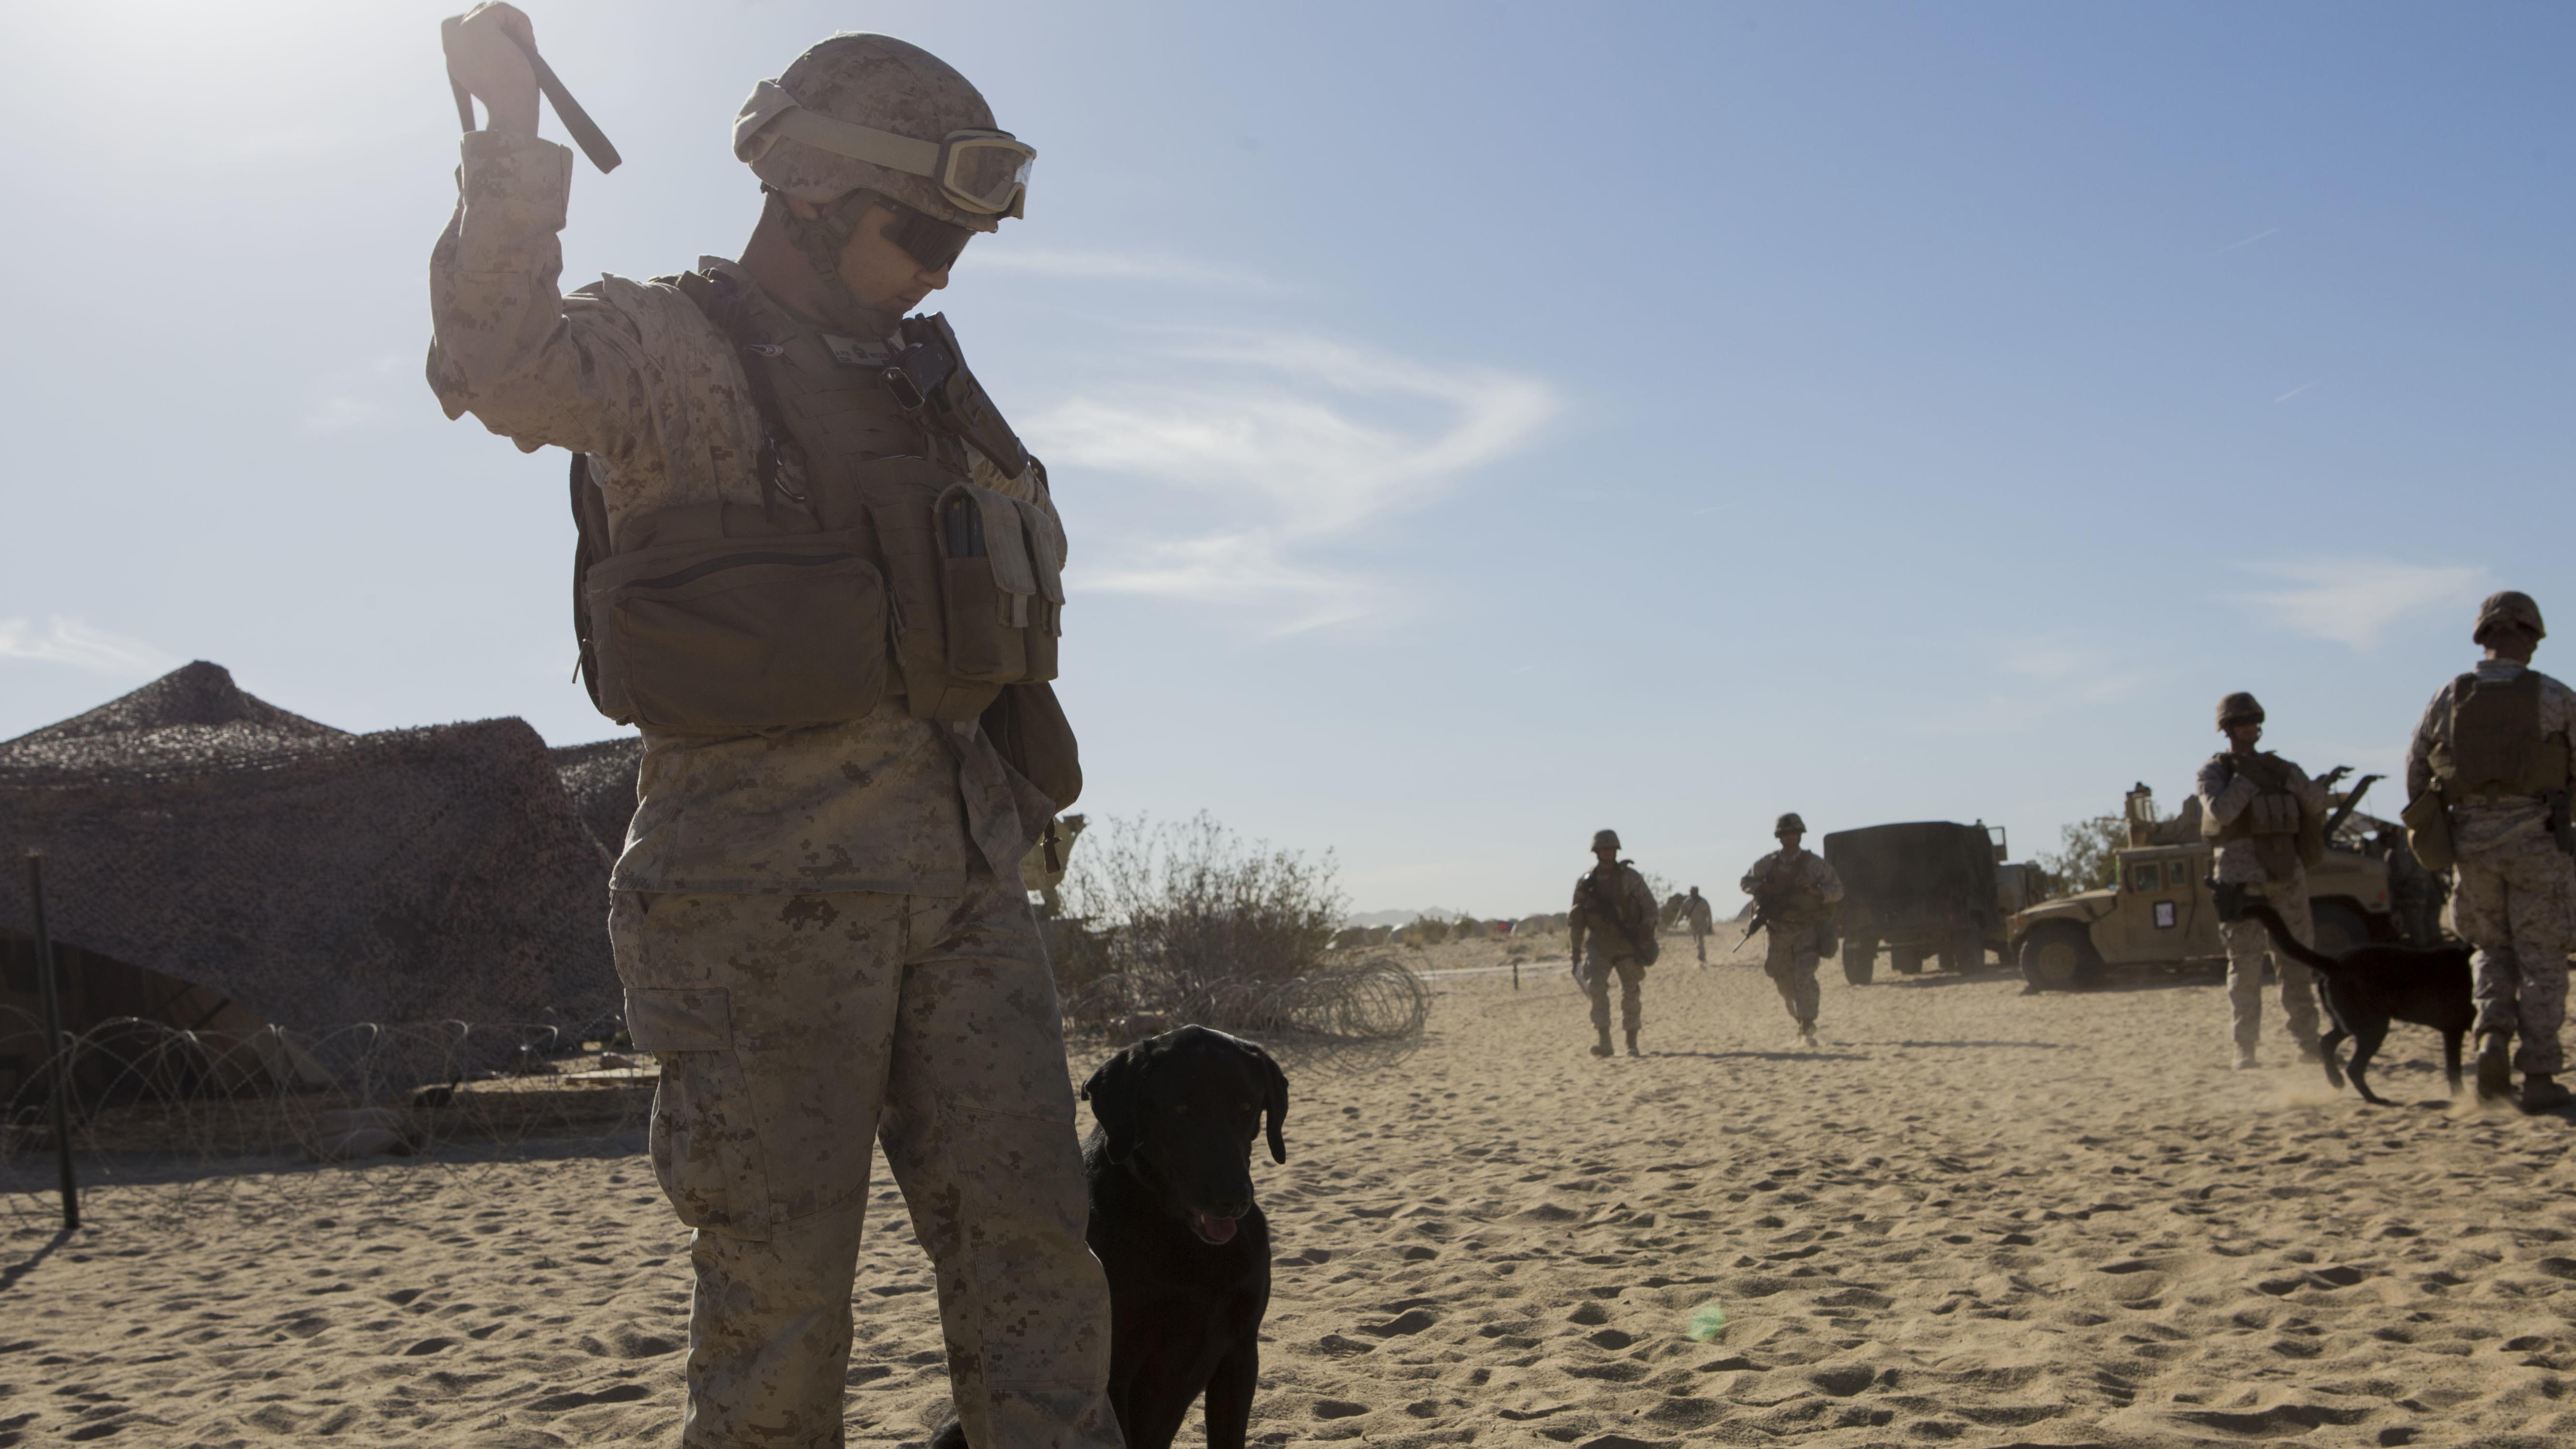 A Marine with 1st Law Enforcement Battalion, I Marine Expeditionary Force, prepares to commence directed seek and receive drills during Exercise Desert Scimitar 2015 aboard Marine Corps Air Ground Combat Center Twentynine Palms, California, April 9, 2015. US Marine Corps photo.